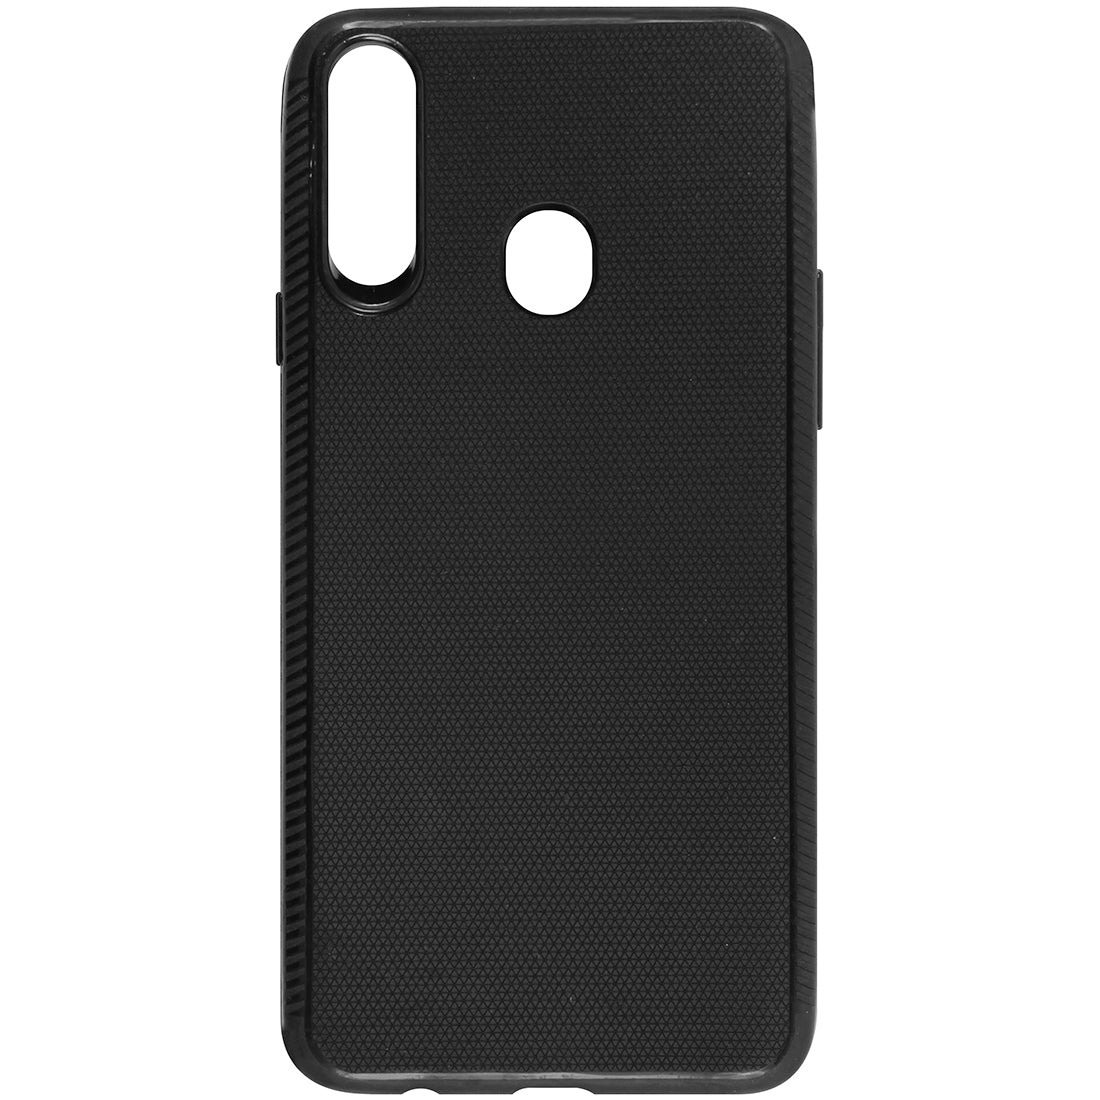 Comfort Grip Back Case Cover for Samsung Galaxy A20s